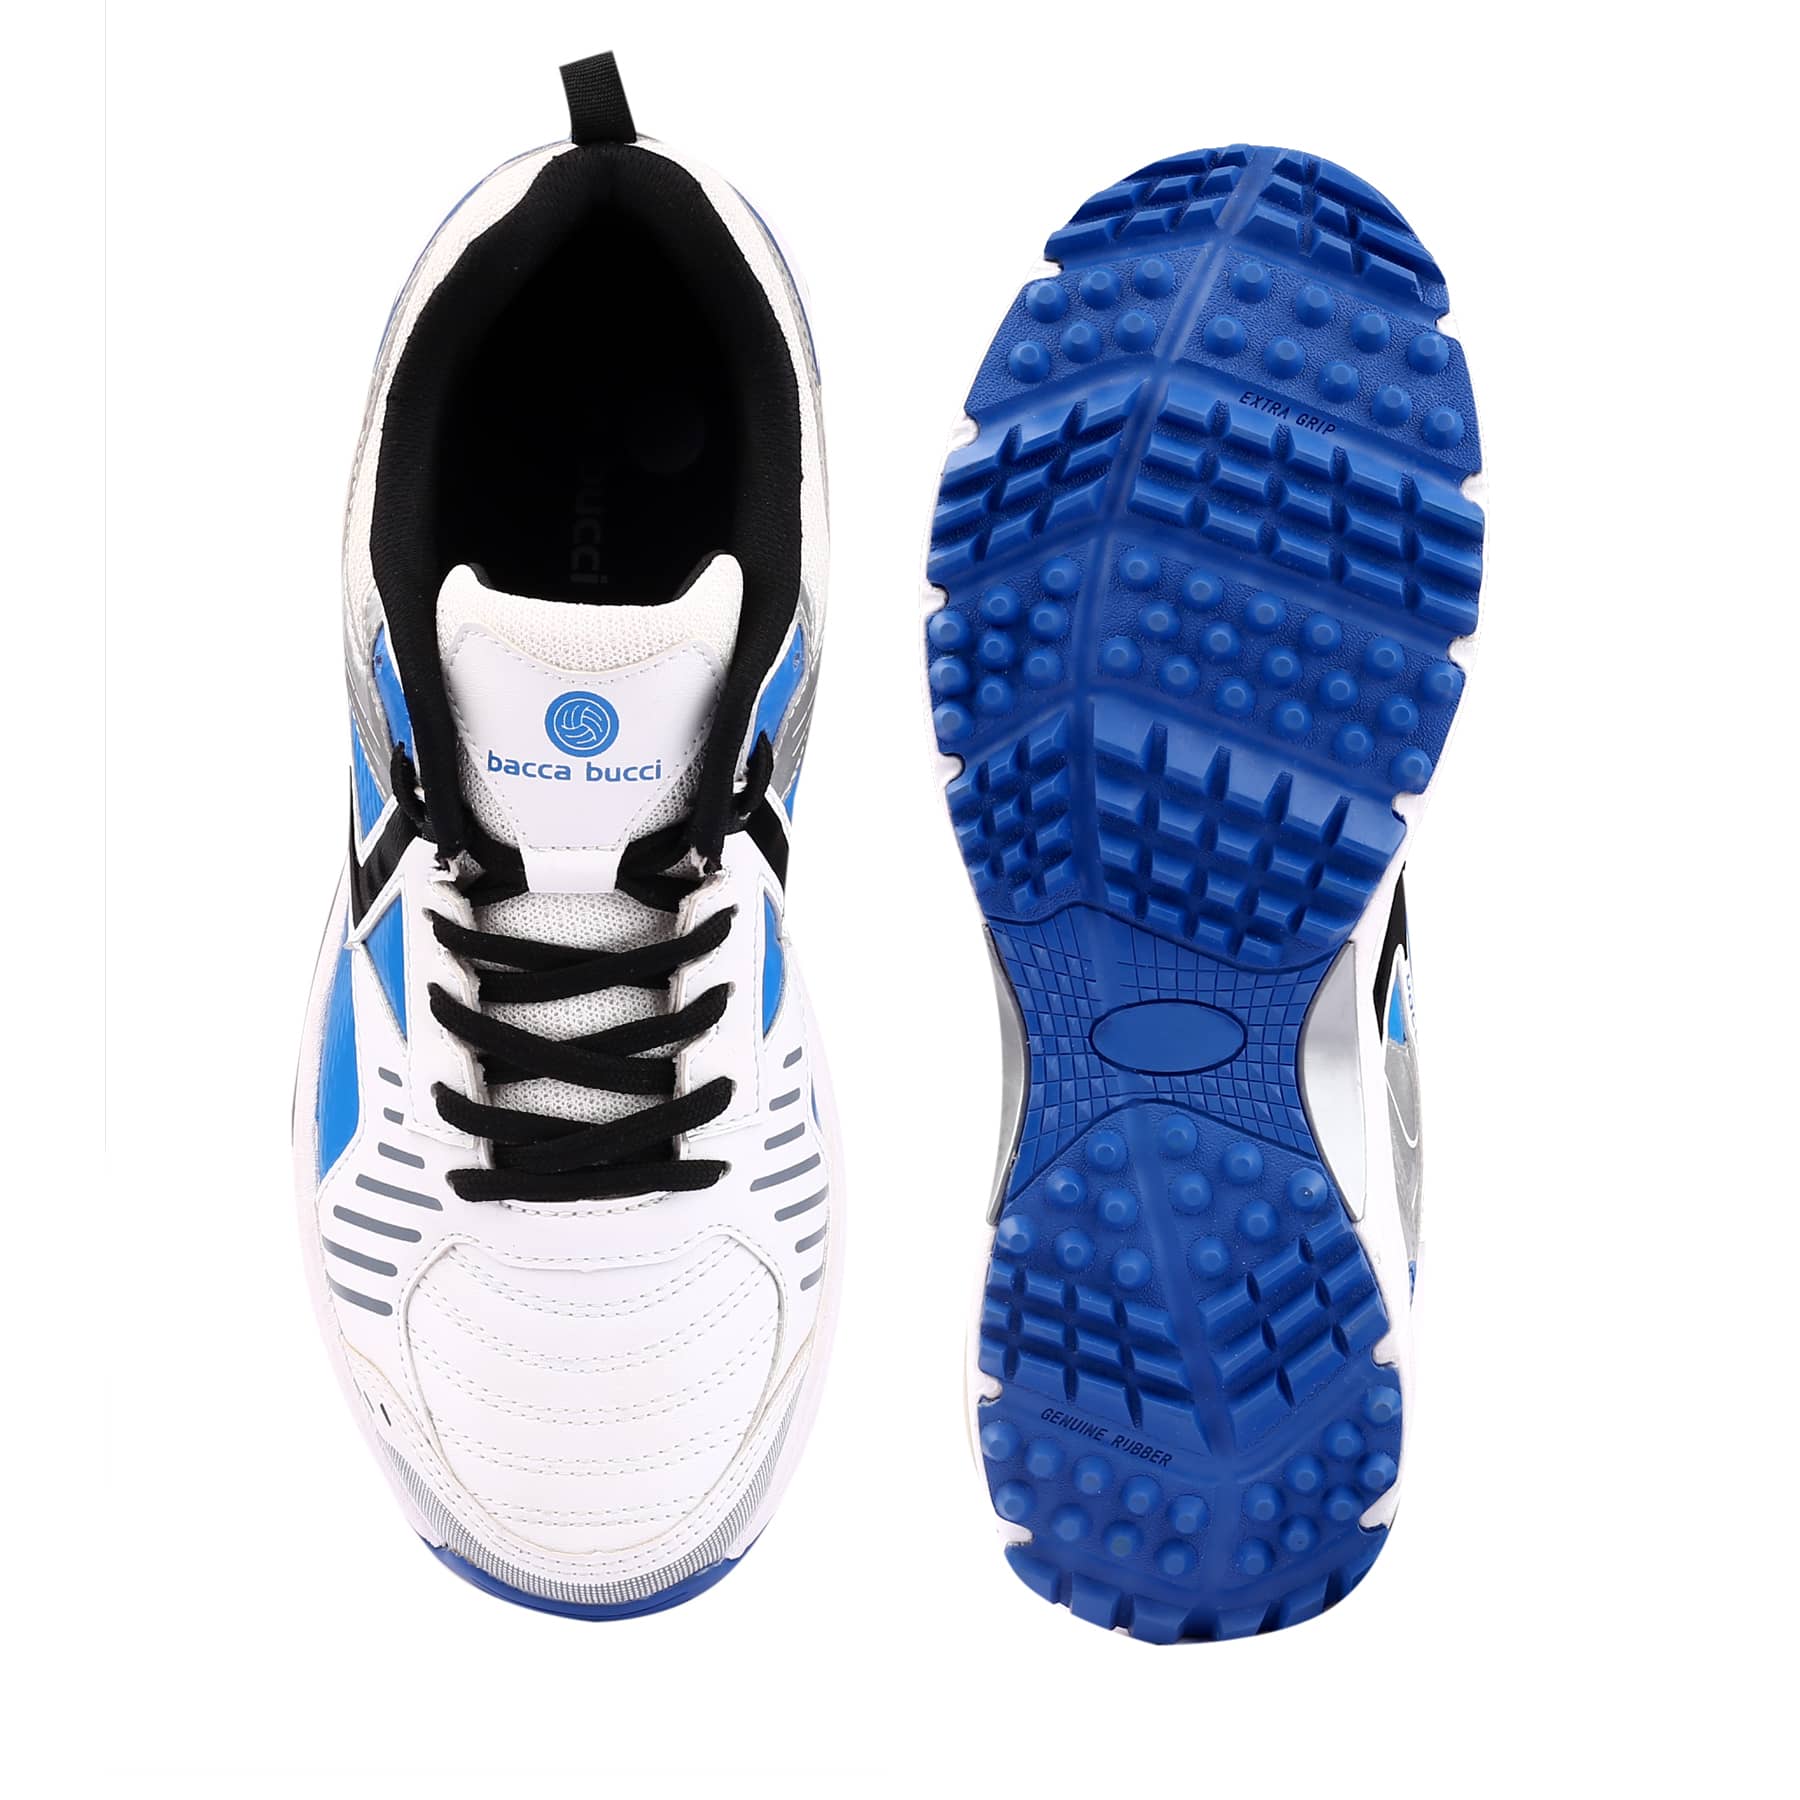 Bacca Bucci Boundary Blazers Cricket Shoes: Dynamic Flex Tech, Superior Traction Grip, Breathable Agility Fit, High-Impact Shock Absorption